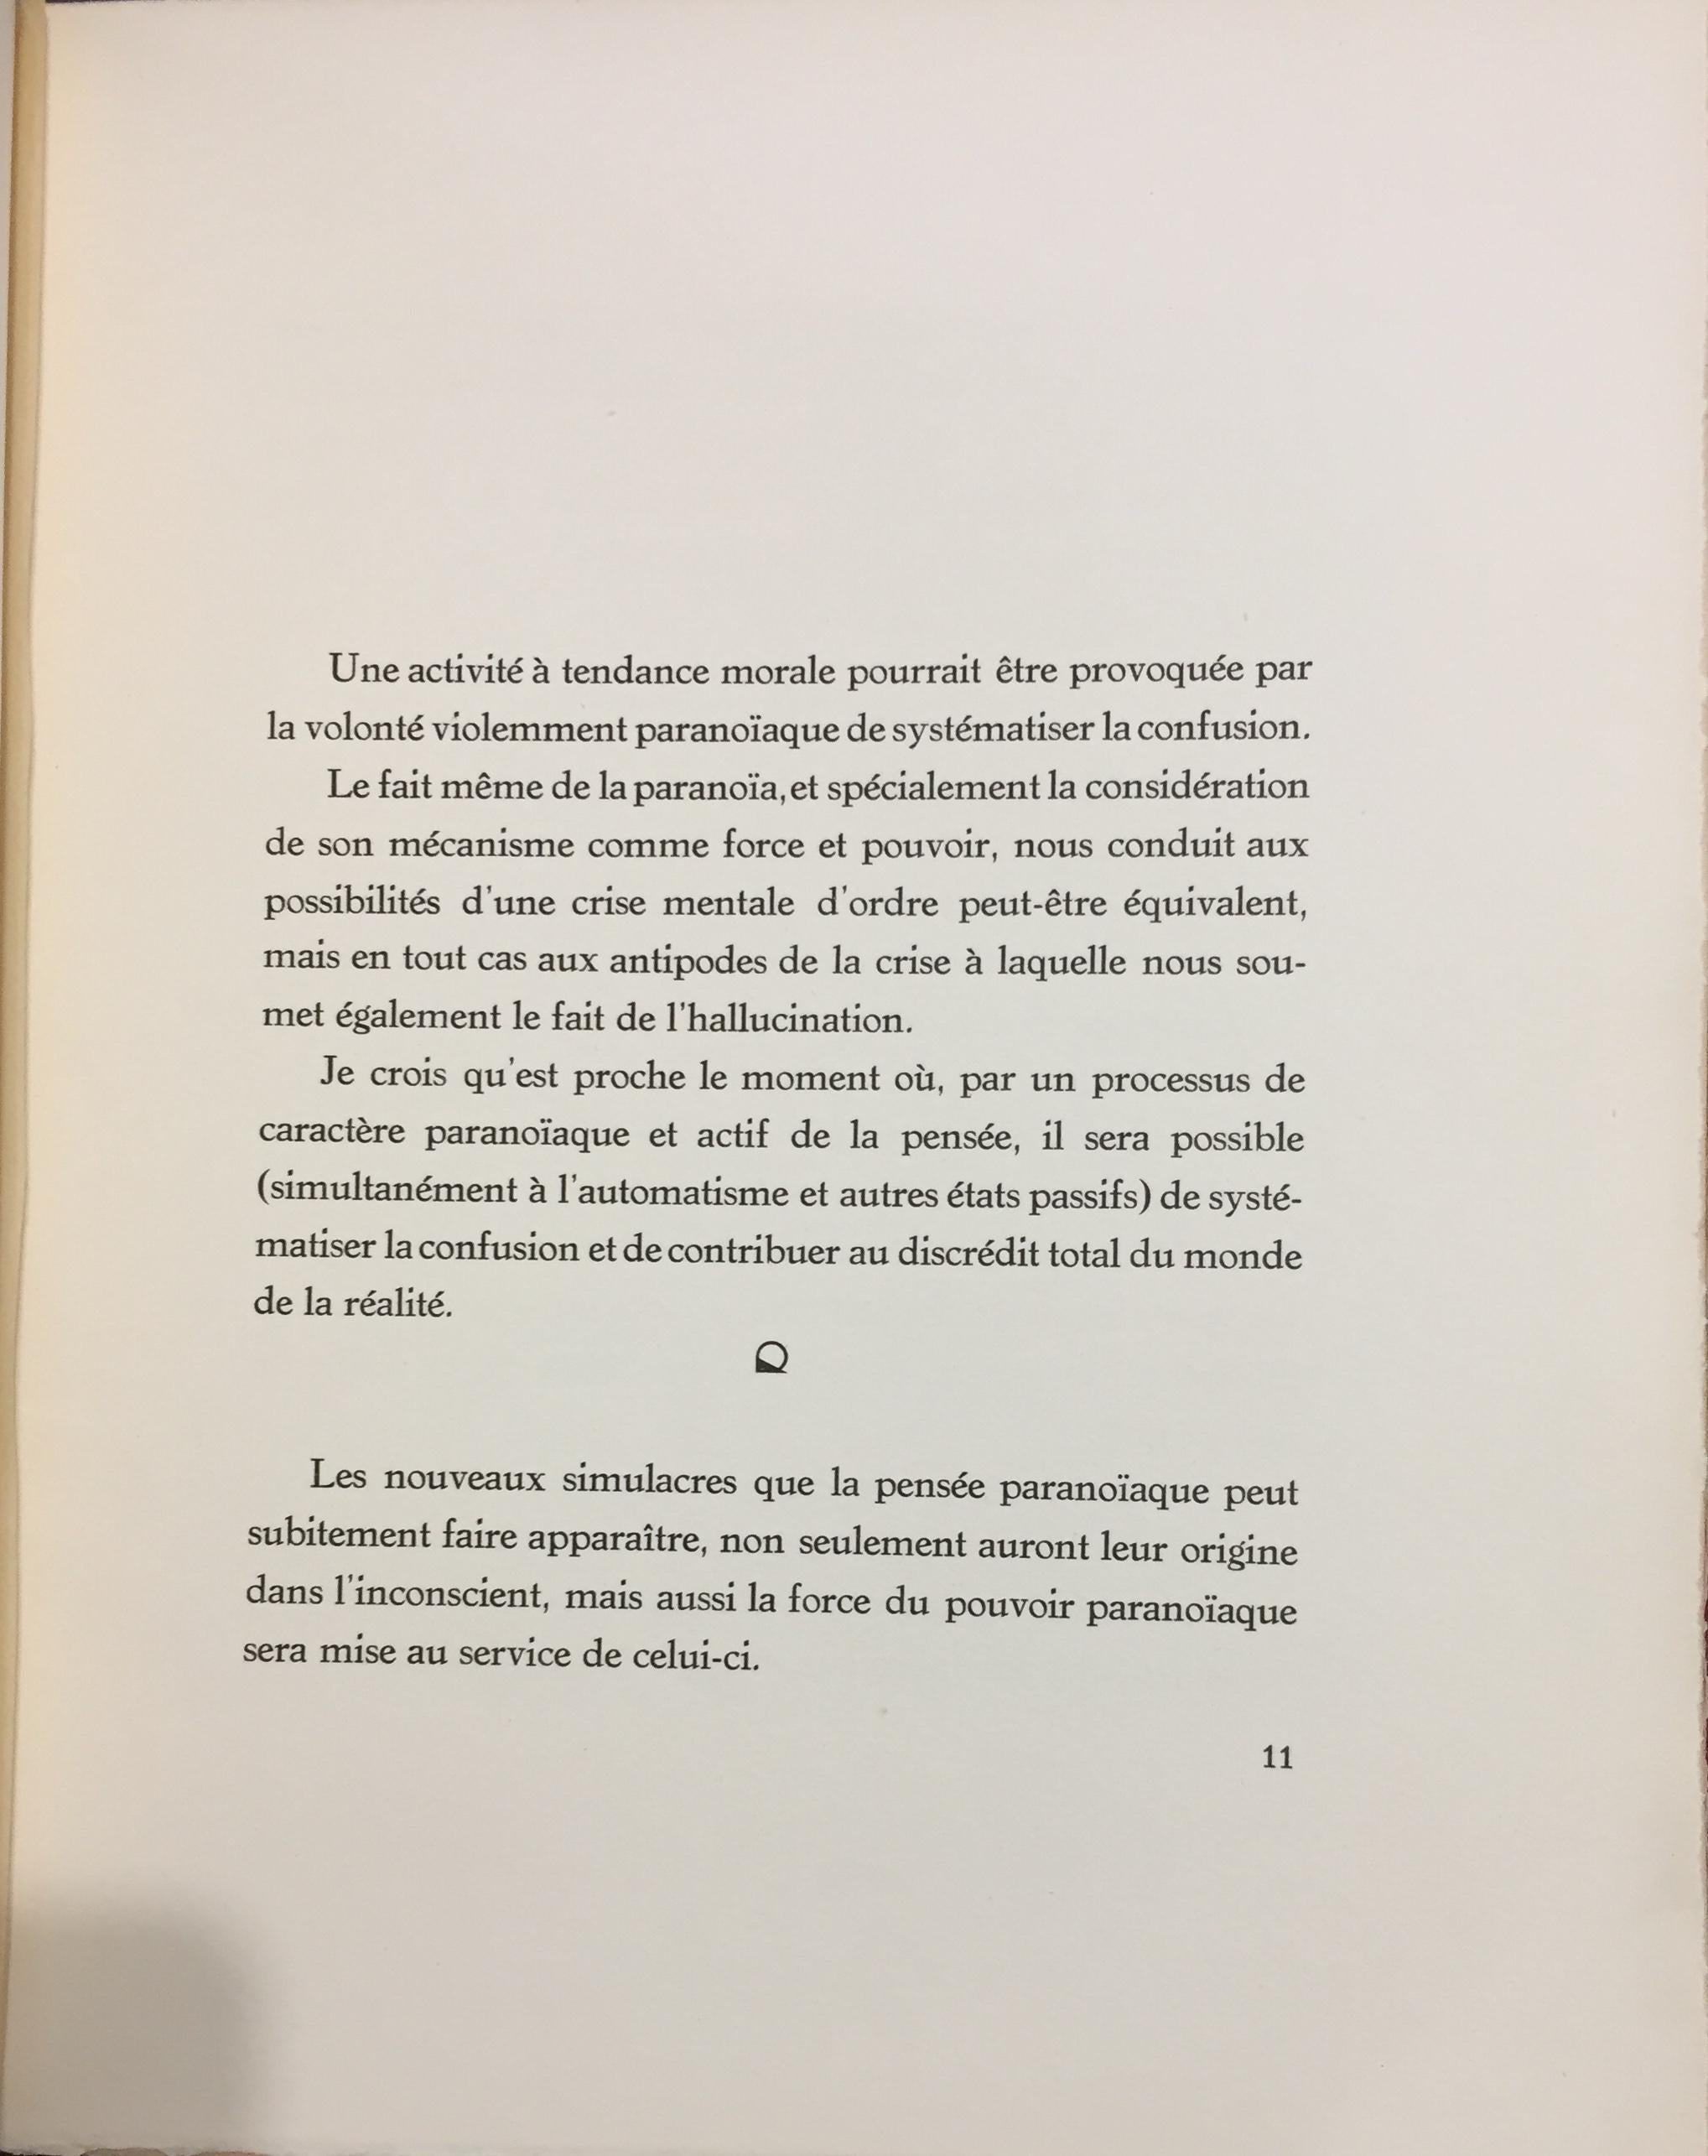 Edition of 175 specimens (plus 29 out of commerce) of this important book by Dalì, published by Editions Surréalistes in 1930 and one of the first books to be illustrated by Dalì. It belongs to the 